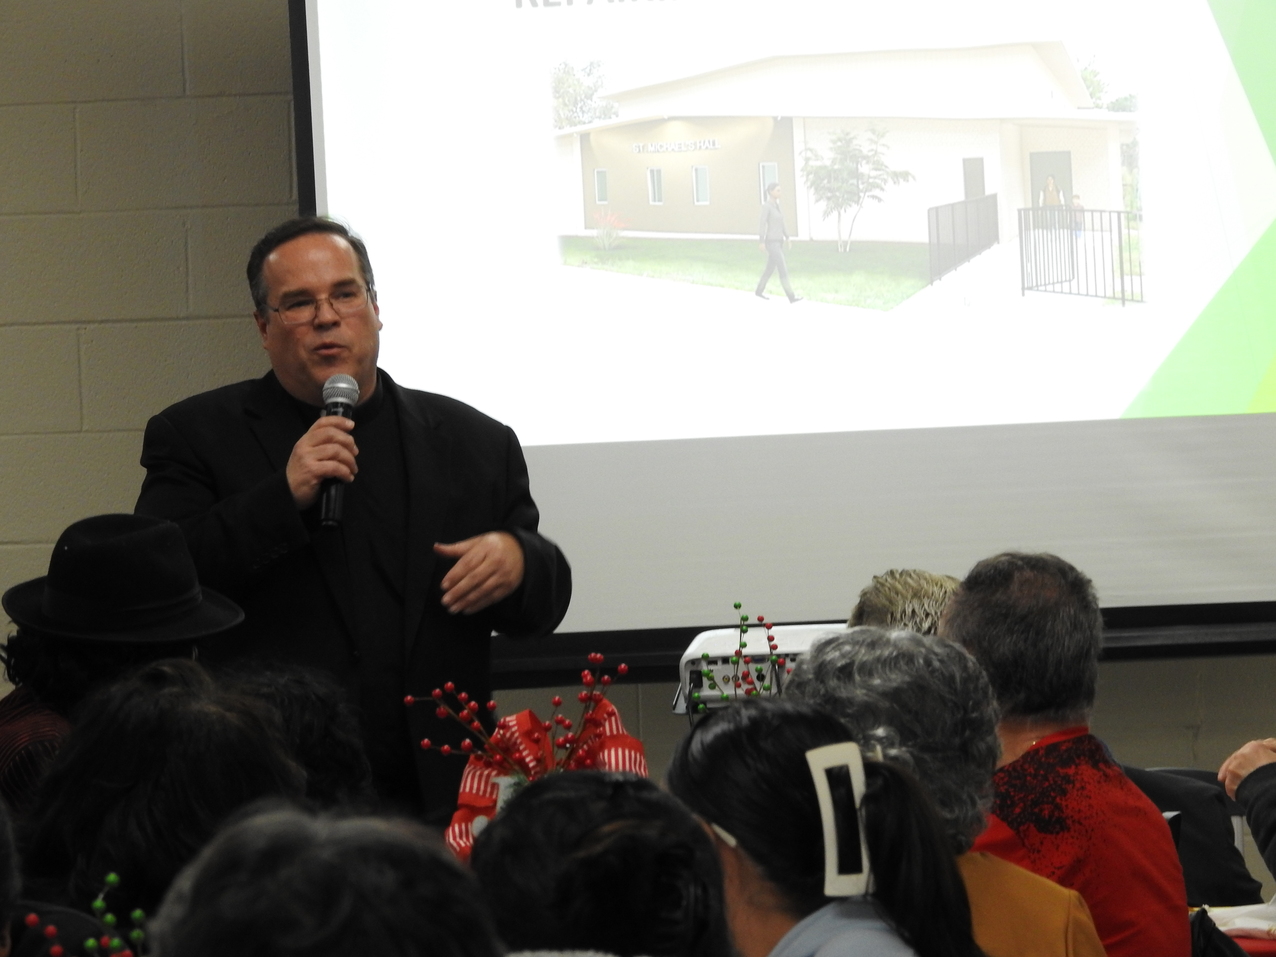  Newly renovated St. Michael the Archangel Parish Hall is blessed by Bishop Malesic